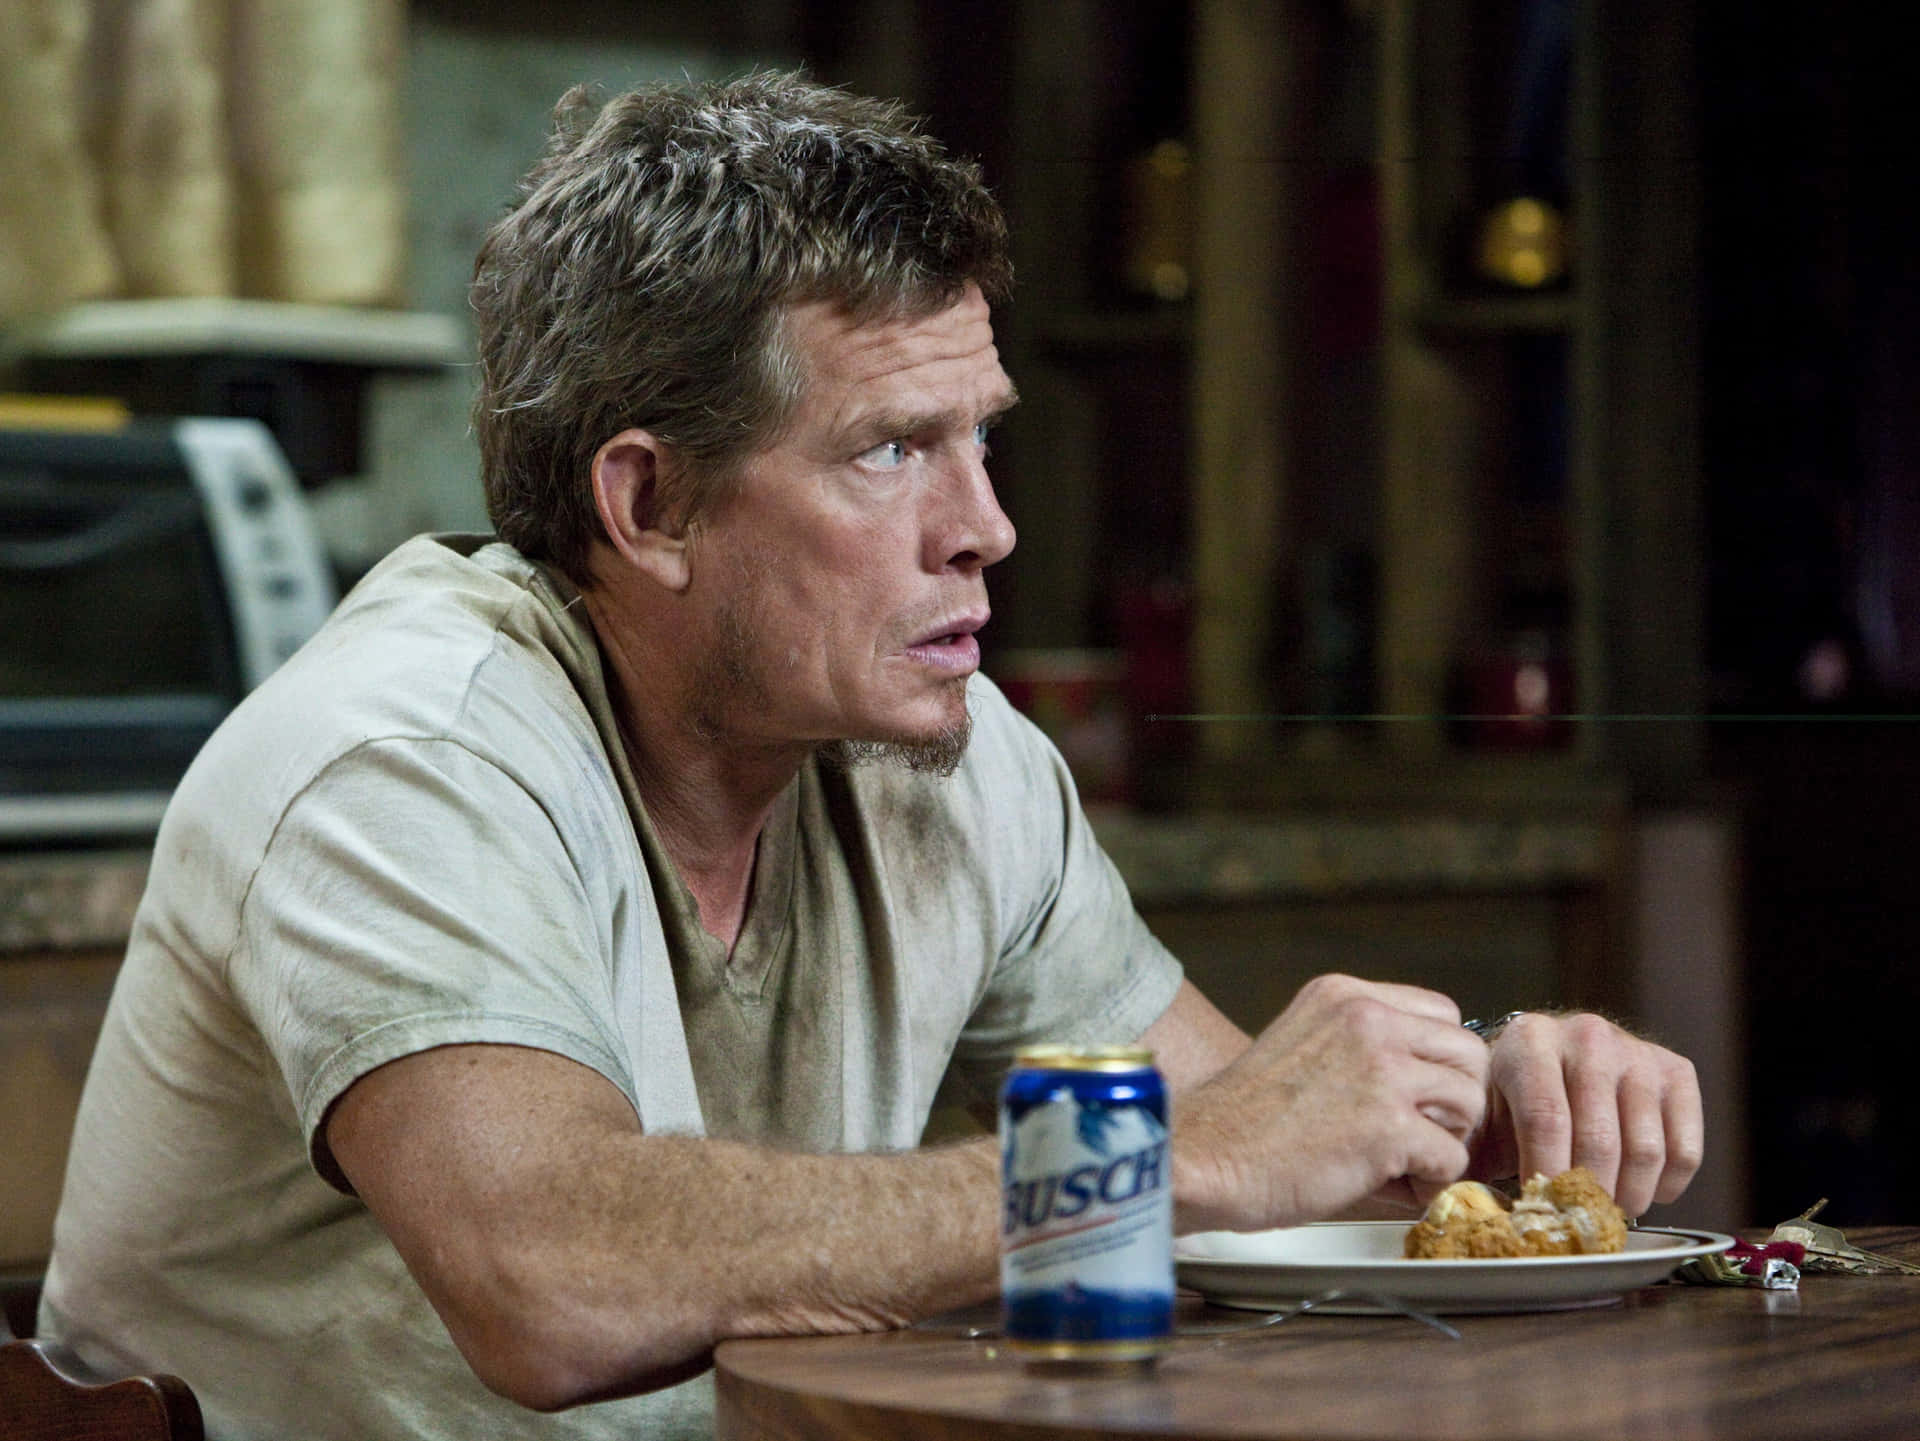 Actorthomas Haden Church Could Be Translated Into Spanish As 